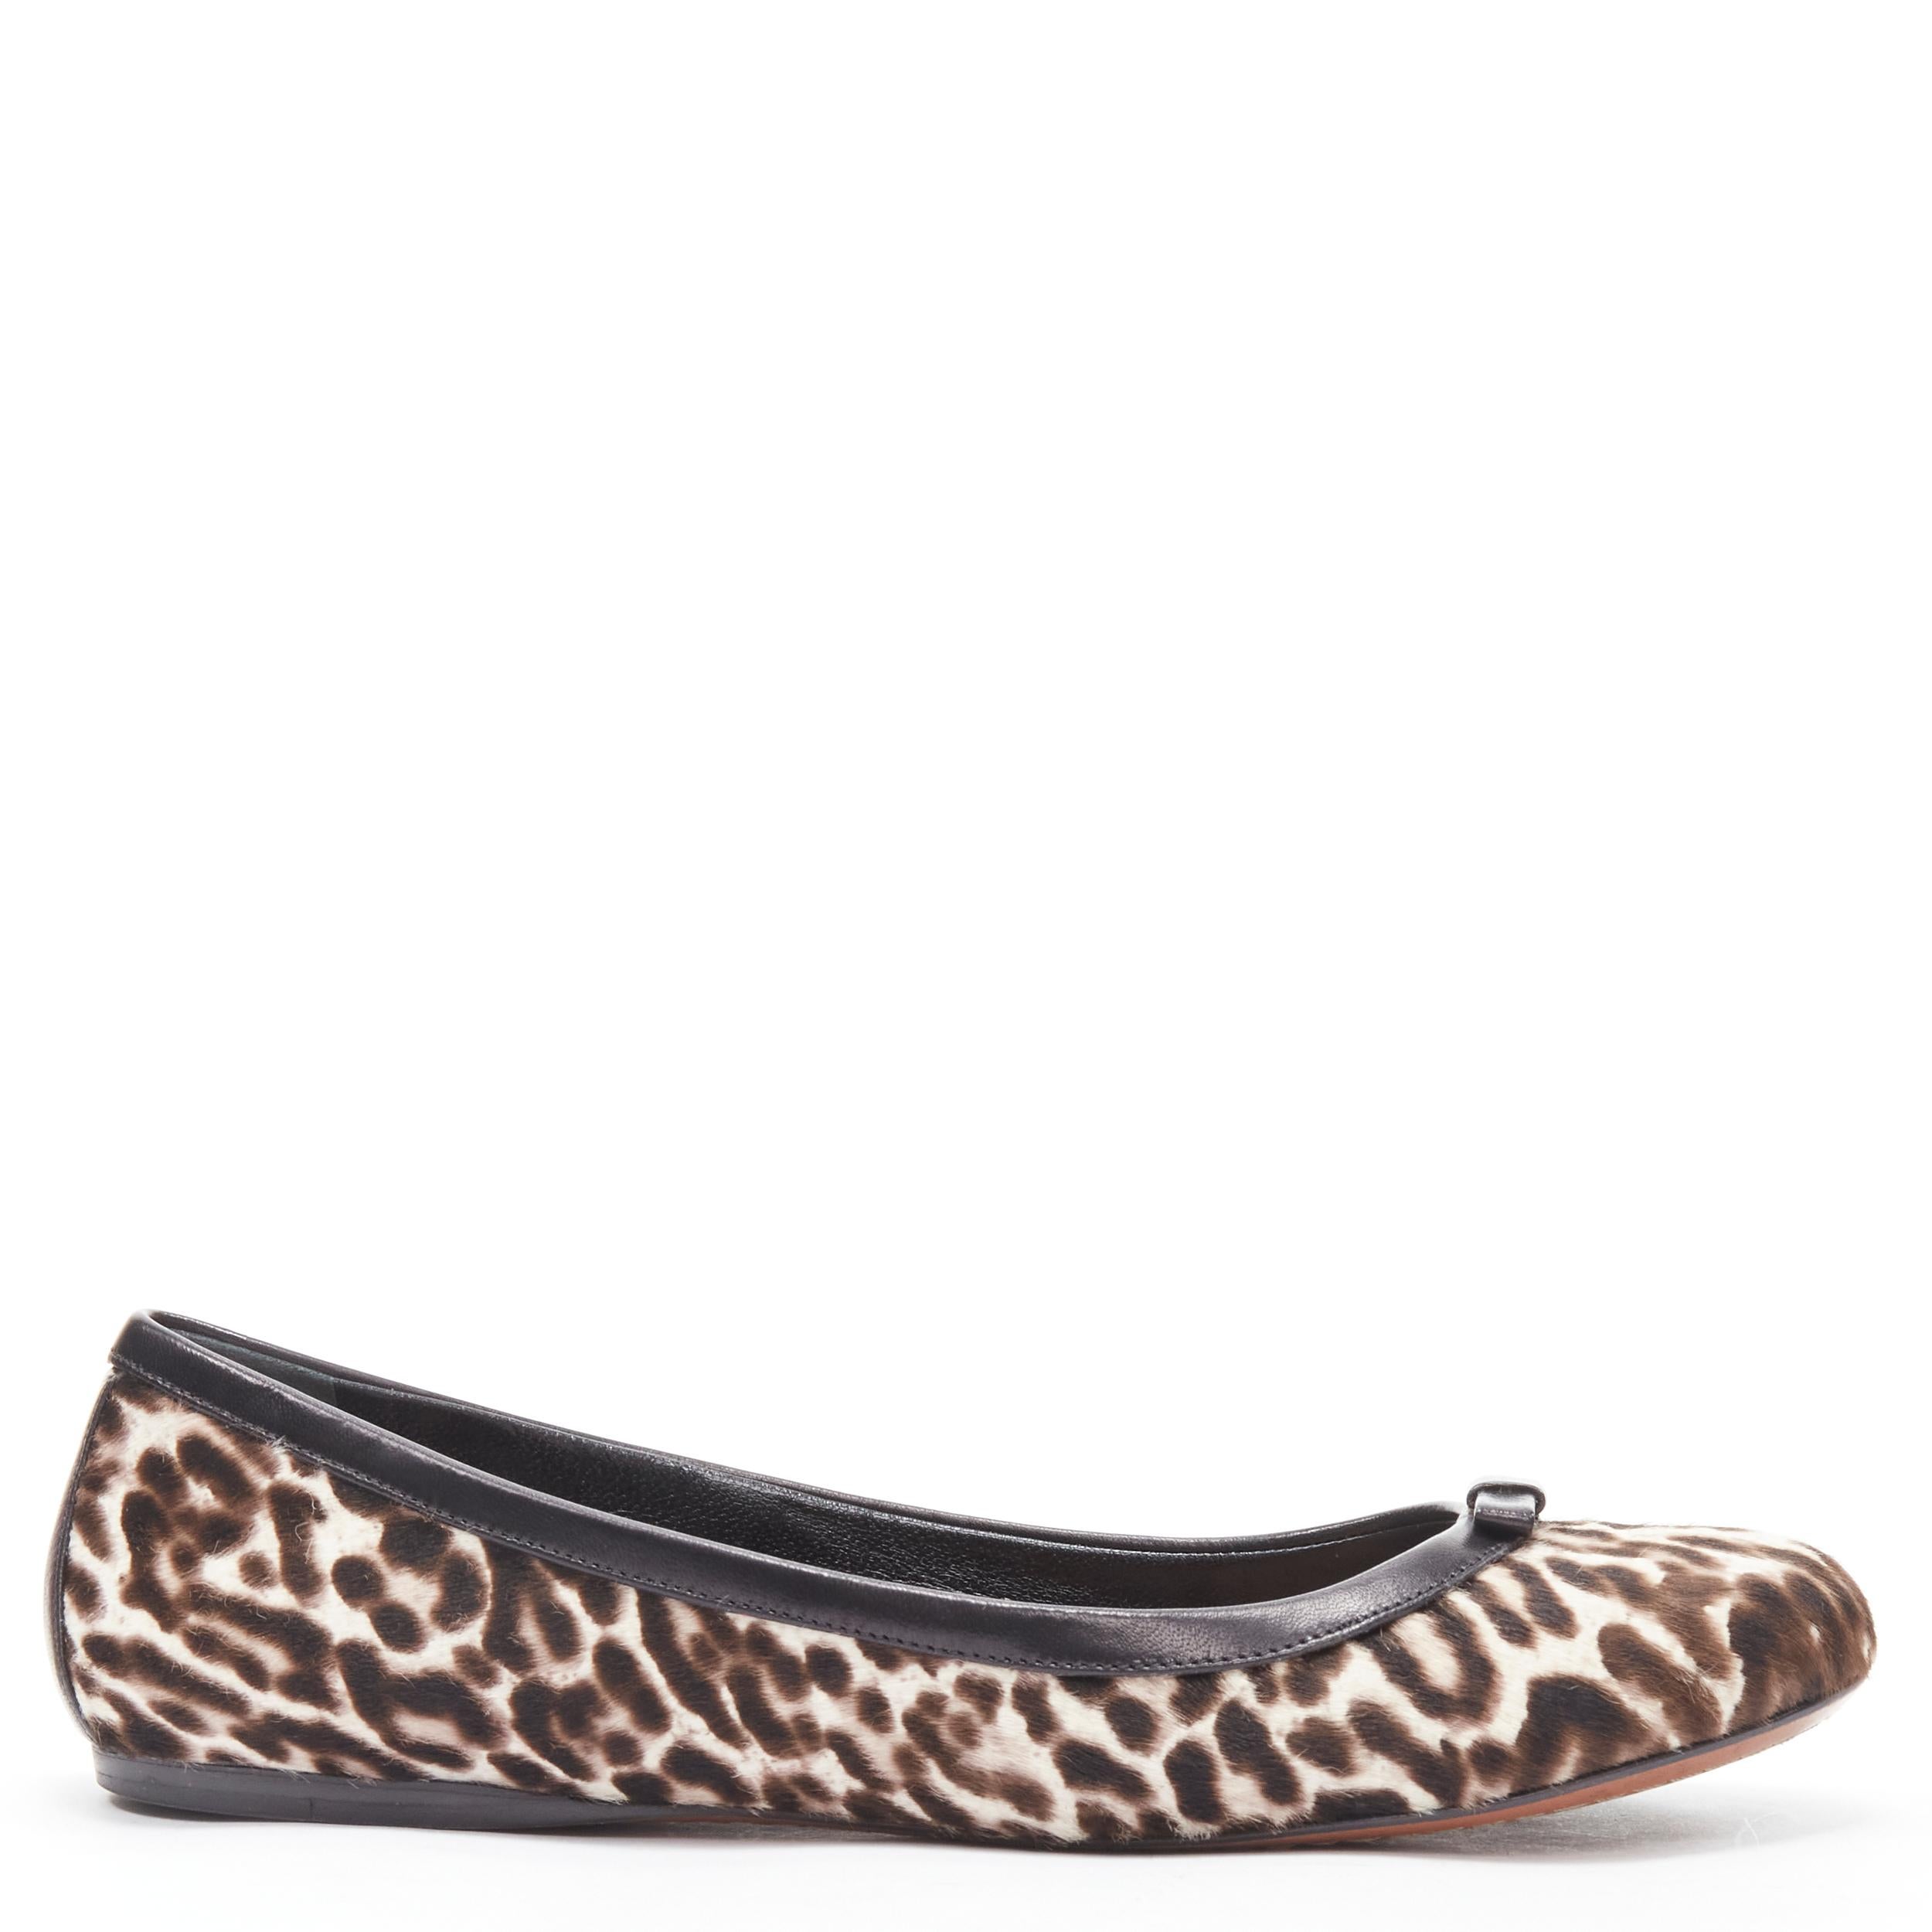 ALAIA brown leopard spot print pony hair black bow trim ballet flats EU37.5 
Reference: MELK/A00227 
Brand: Alaia 
Designer: Azzedine Alaia 
Material: Leather 
Color: Brown 
Pattern: Leopard 
Made in: Italy 

CONDITION: 
Condition: Excellent, this